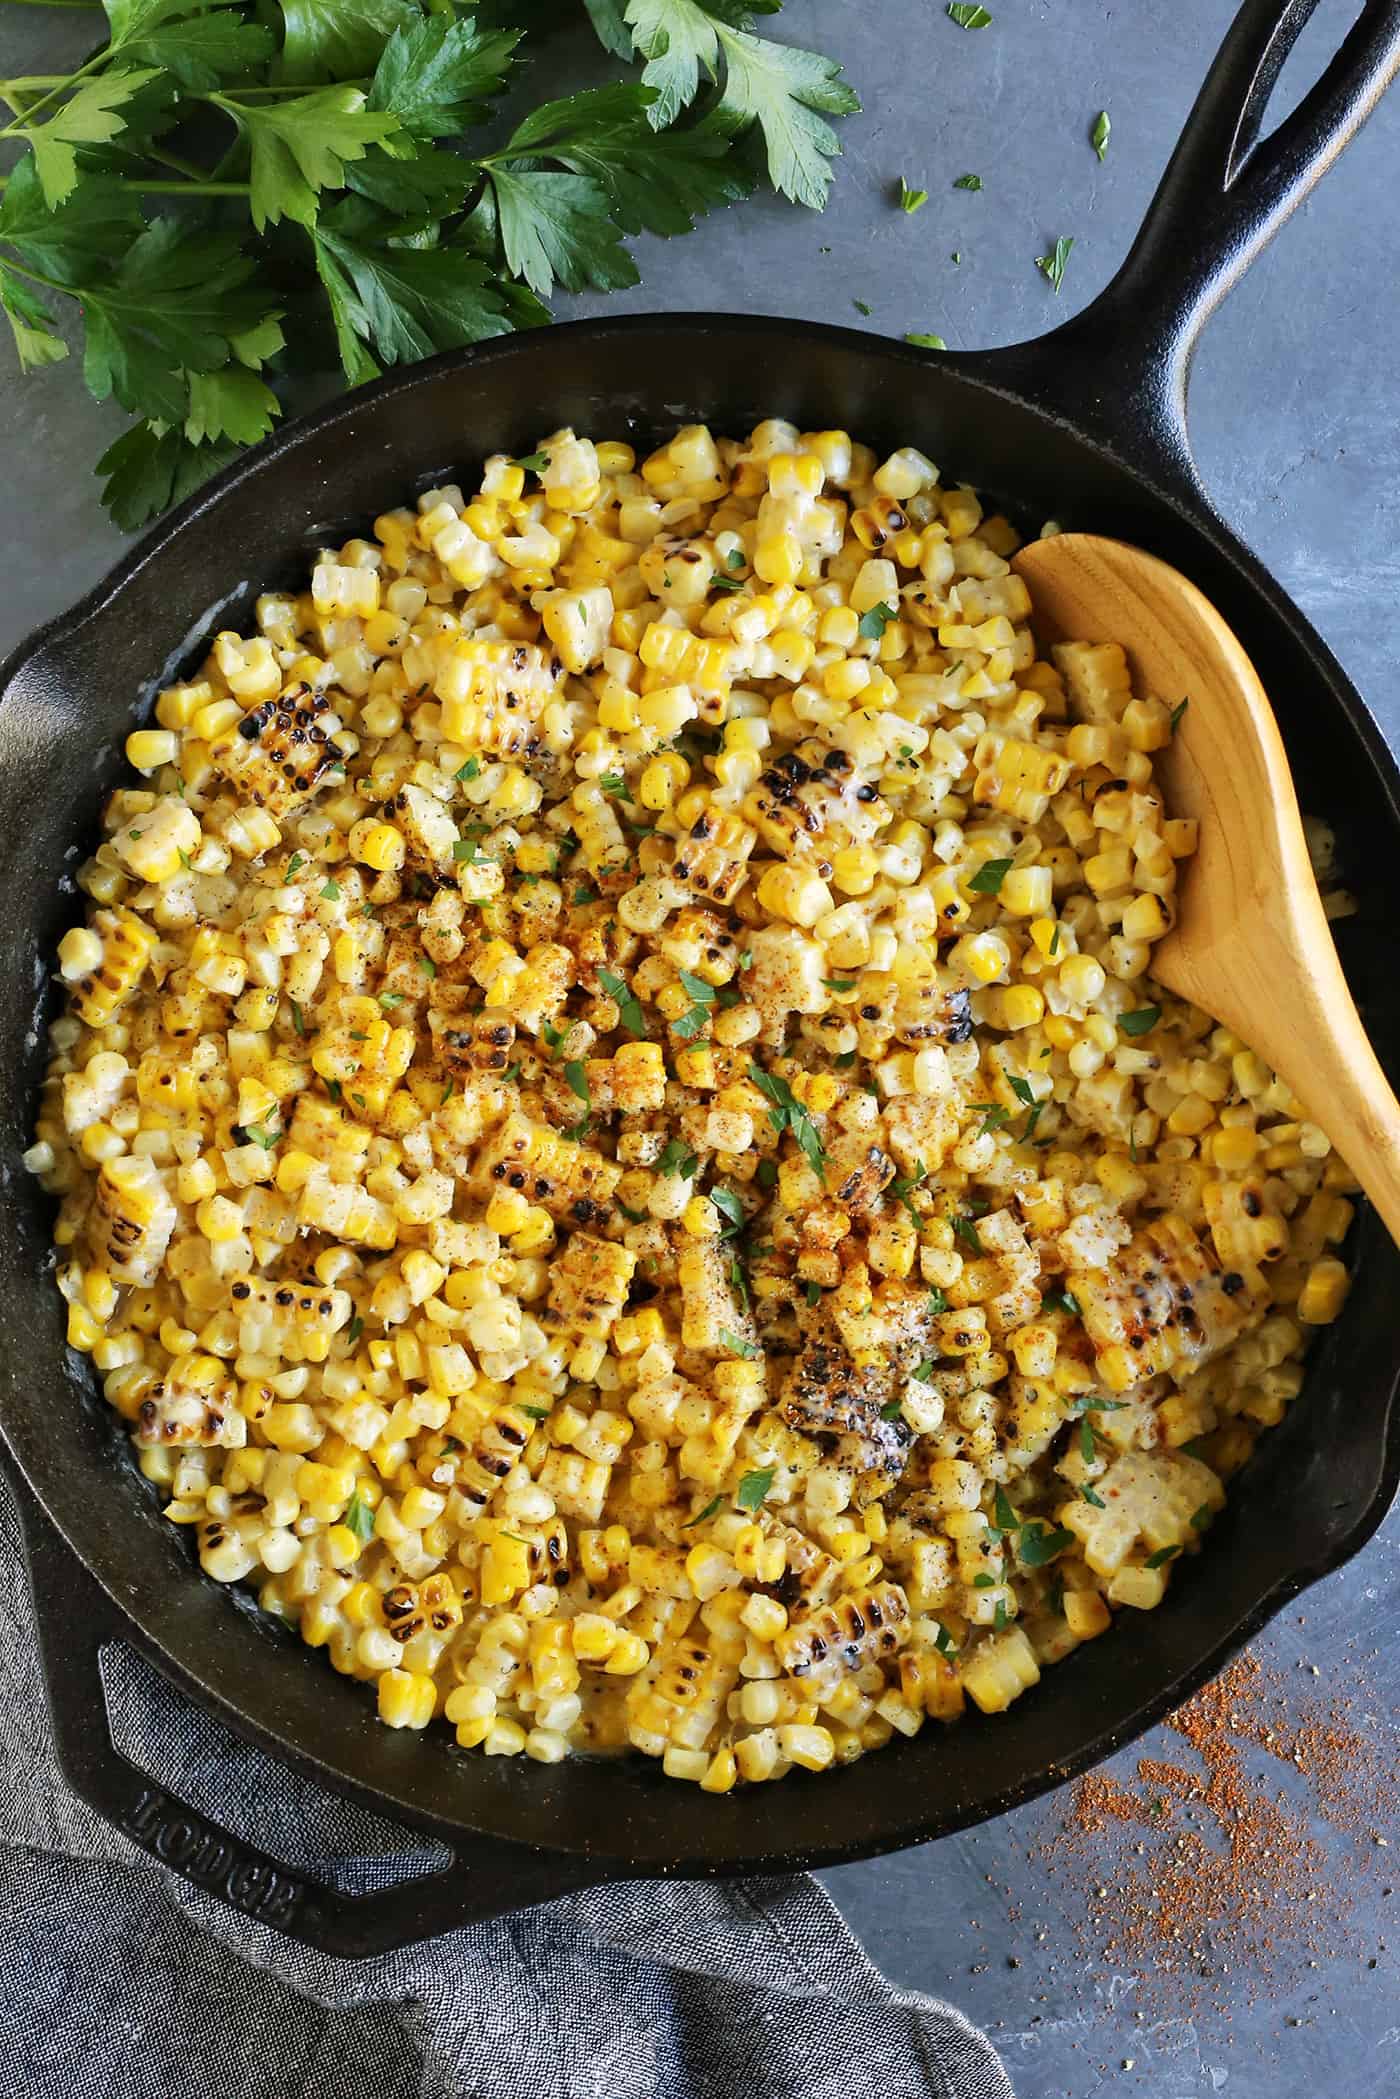 A wooden spoon stirring grilled creamed corn in a cast iron skillet